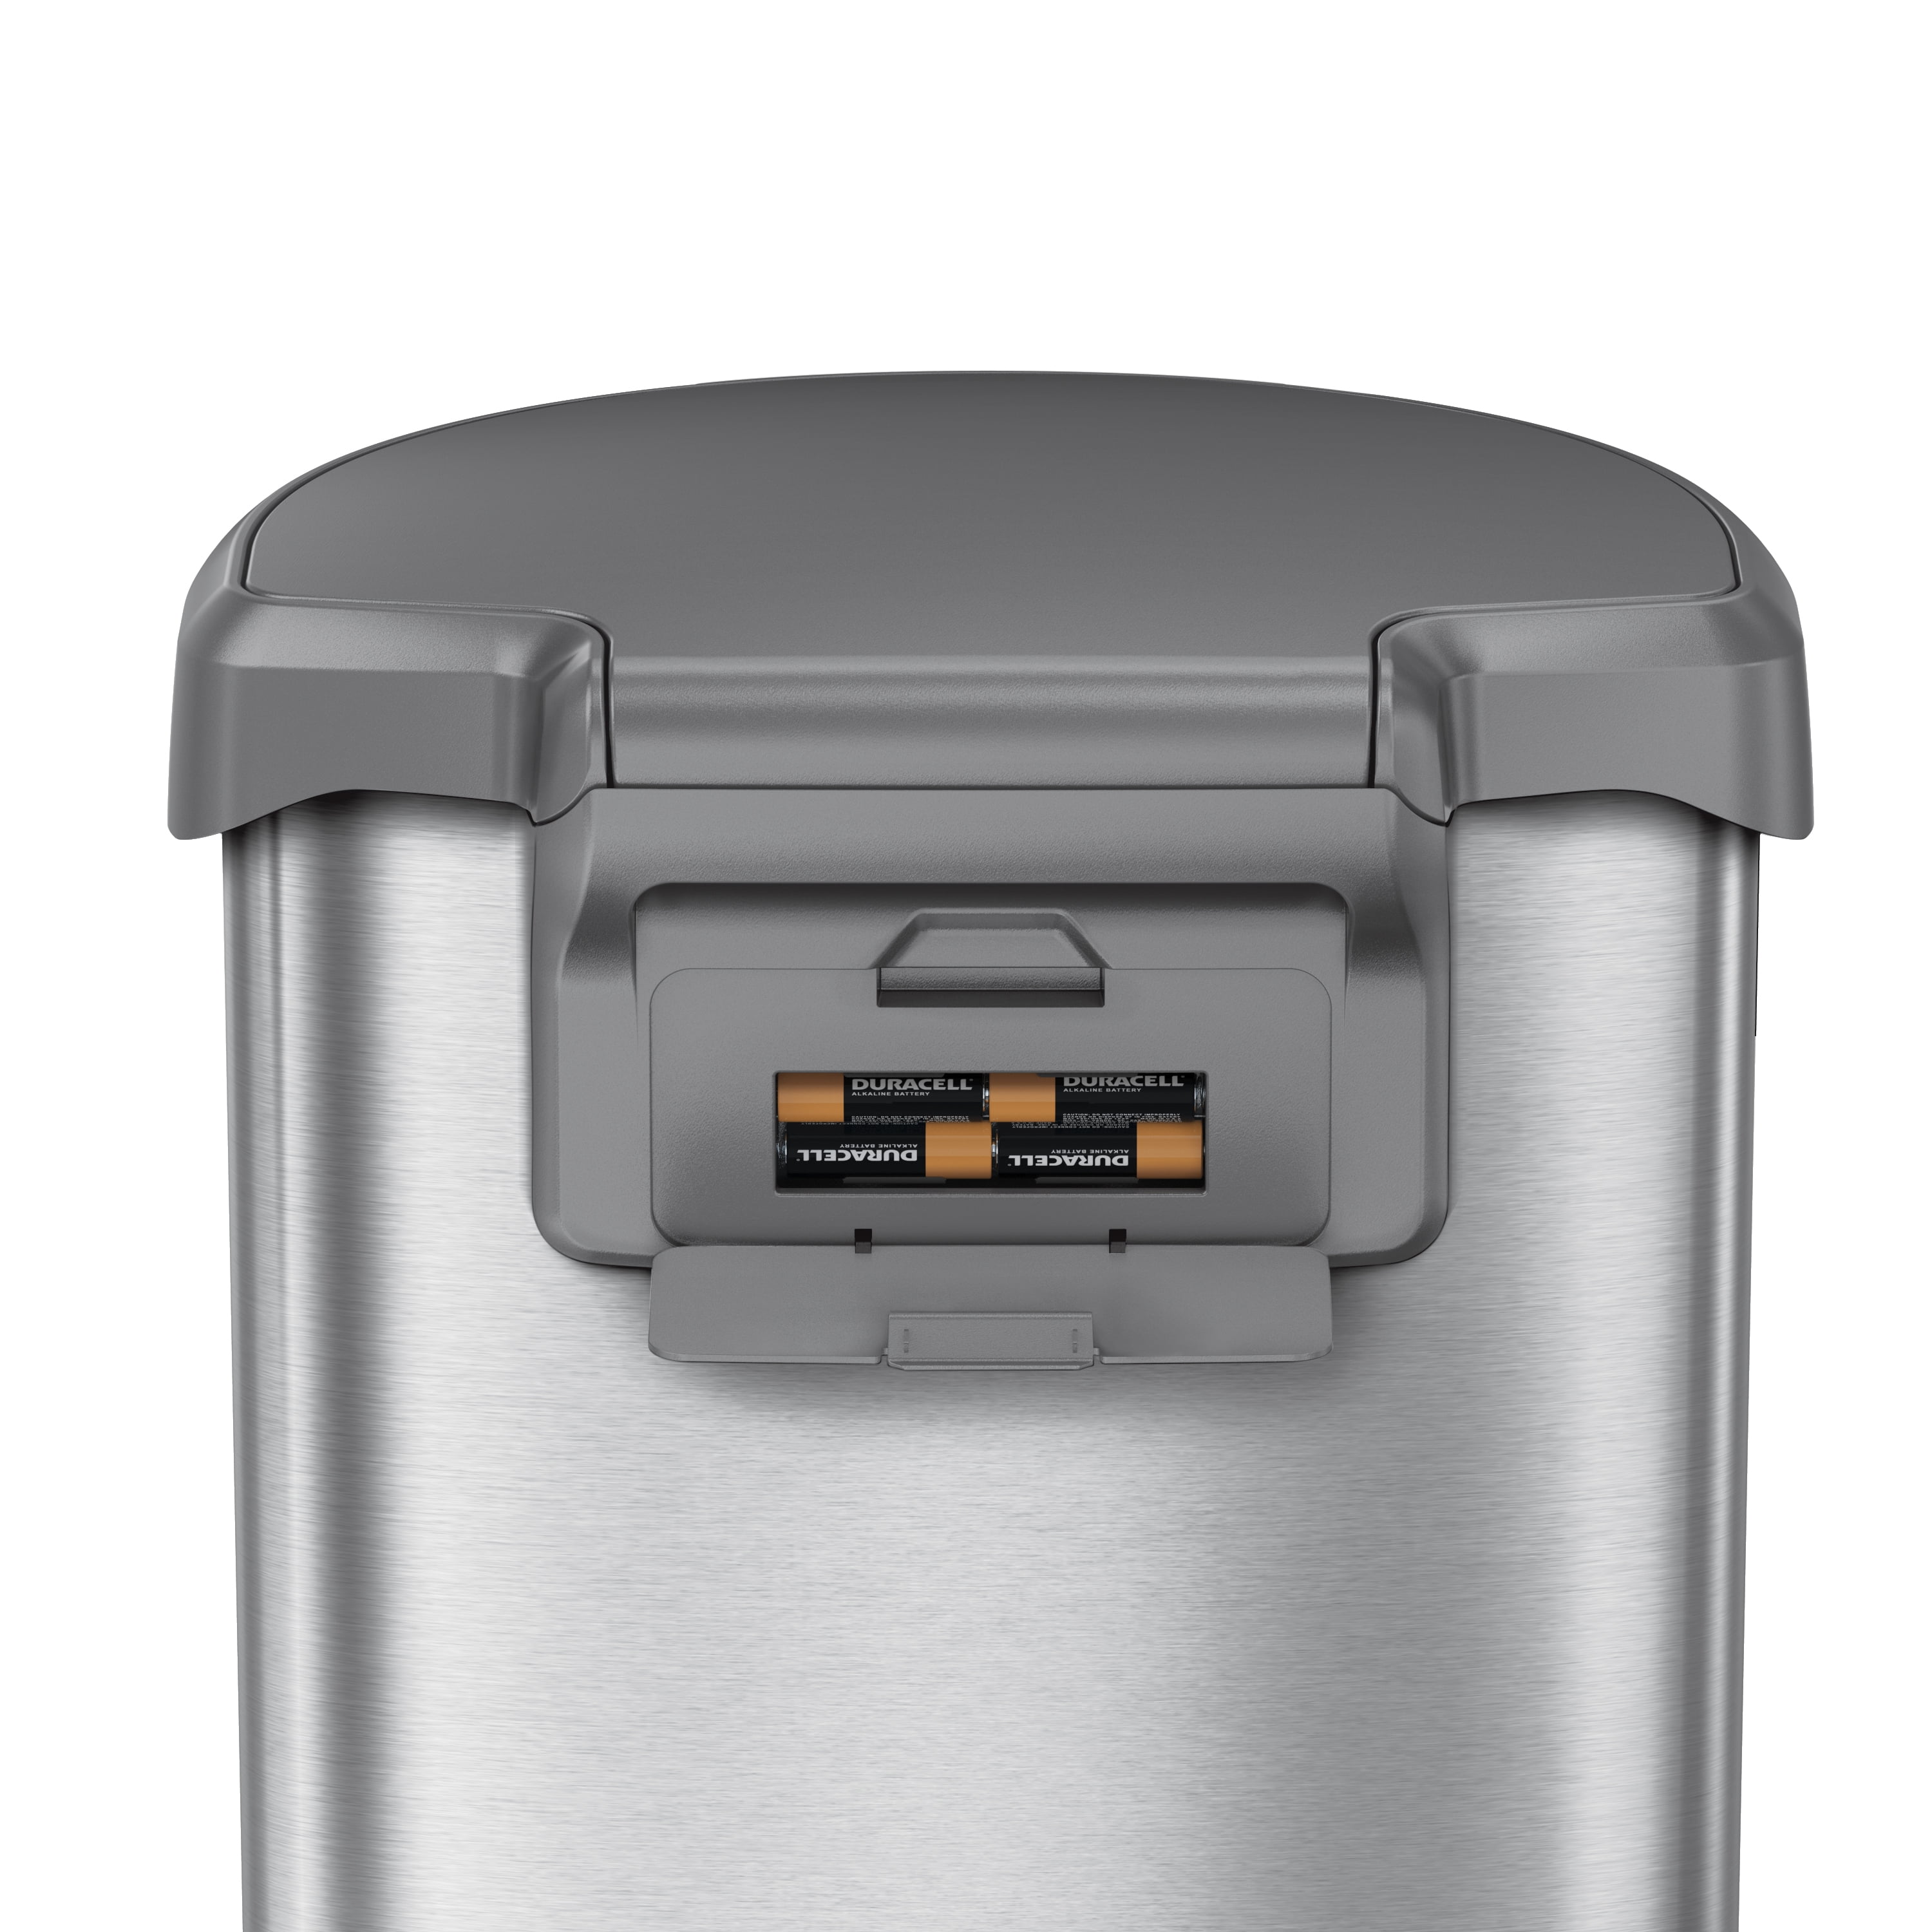 simplehuman Semi Round Sensor Stainless Steel Trash Can With Liner Pocket  12 Gallons 25 14 H x 15 716 W x 12 1316 D Brushed Stainless Steel - Office  Depot